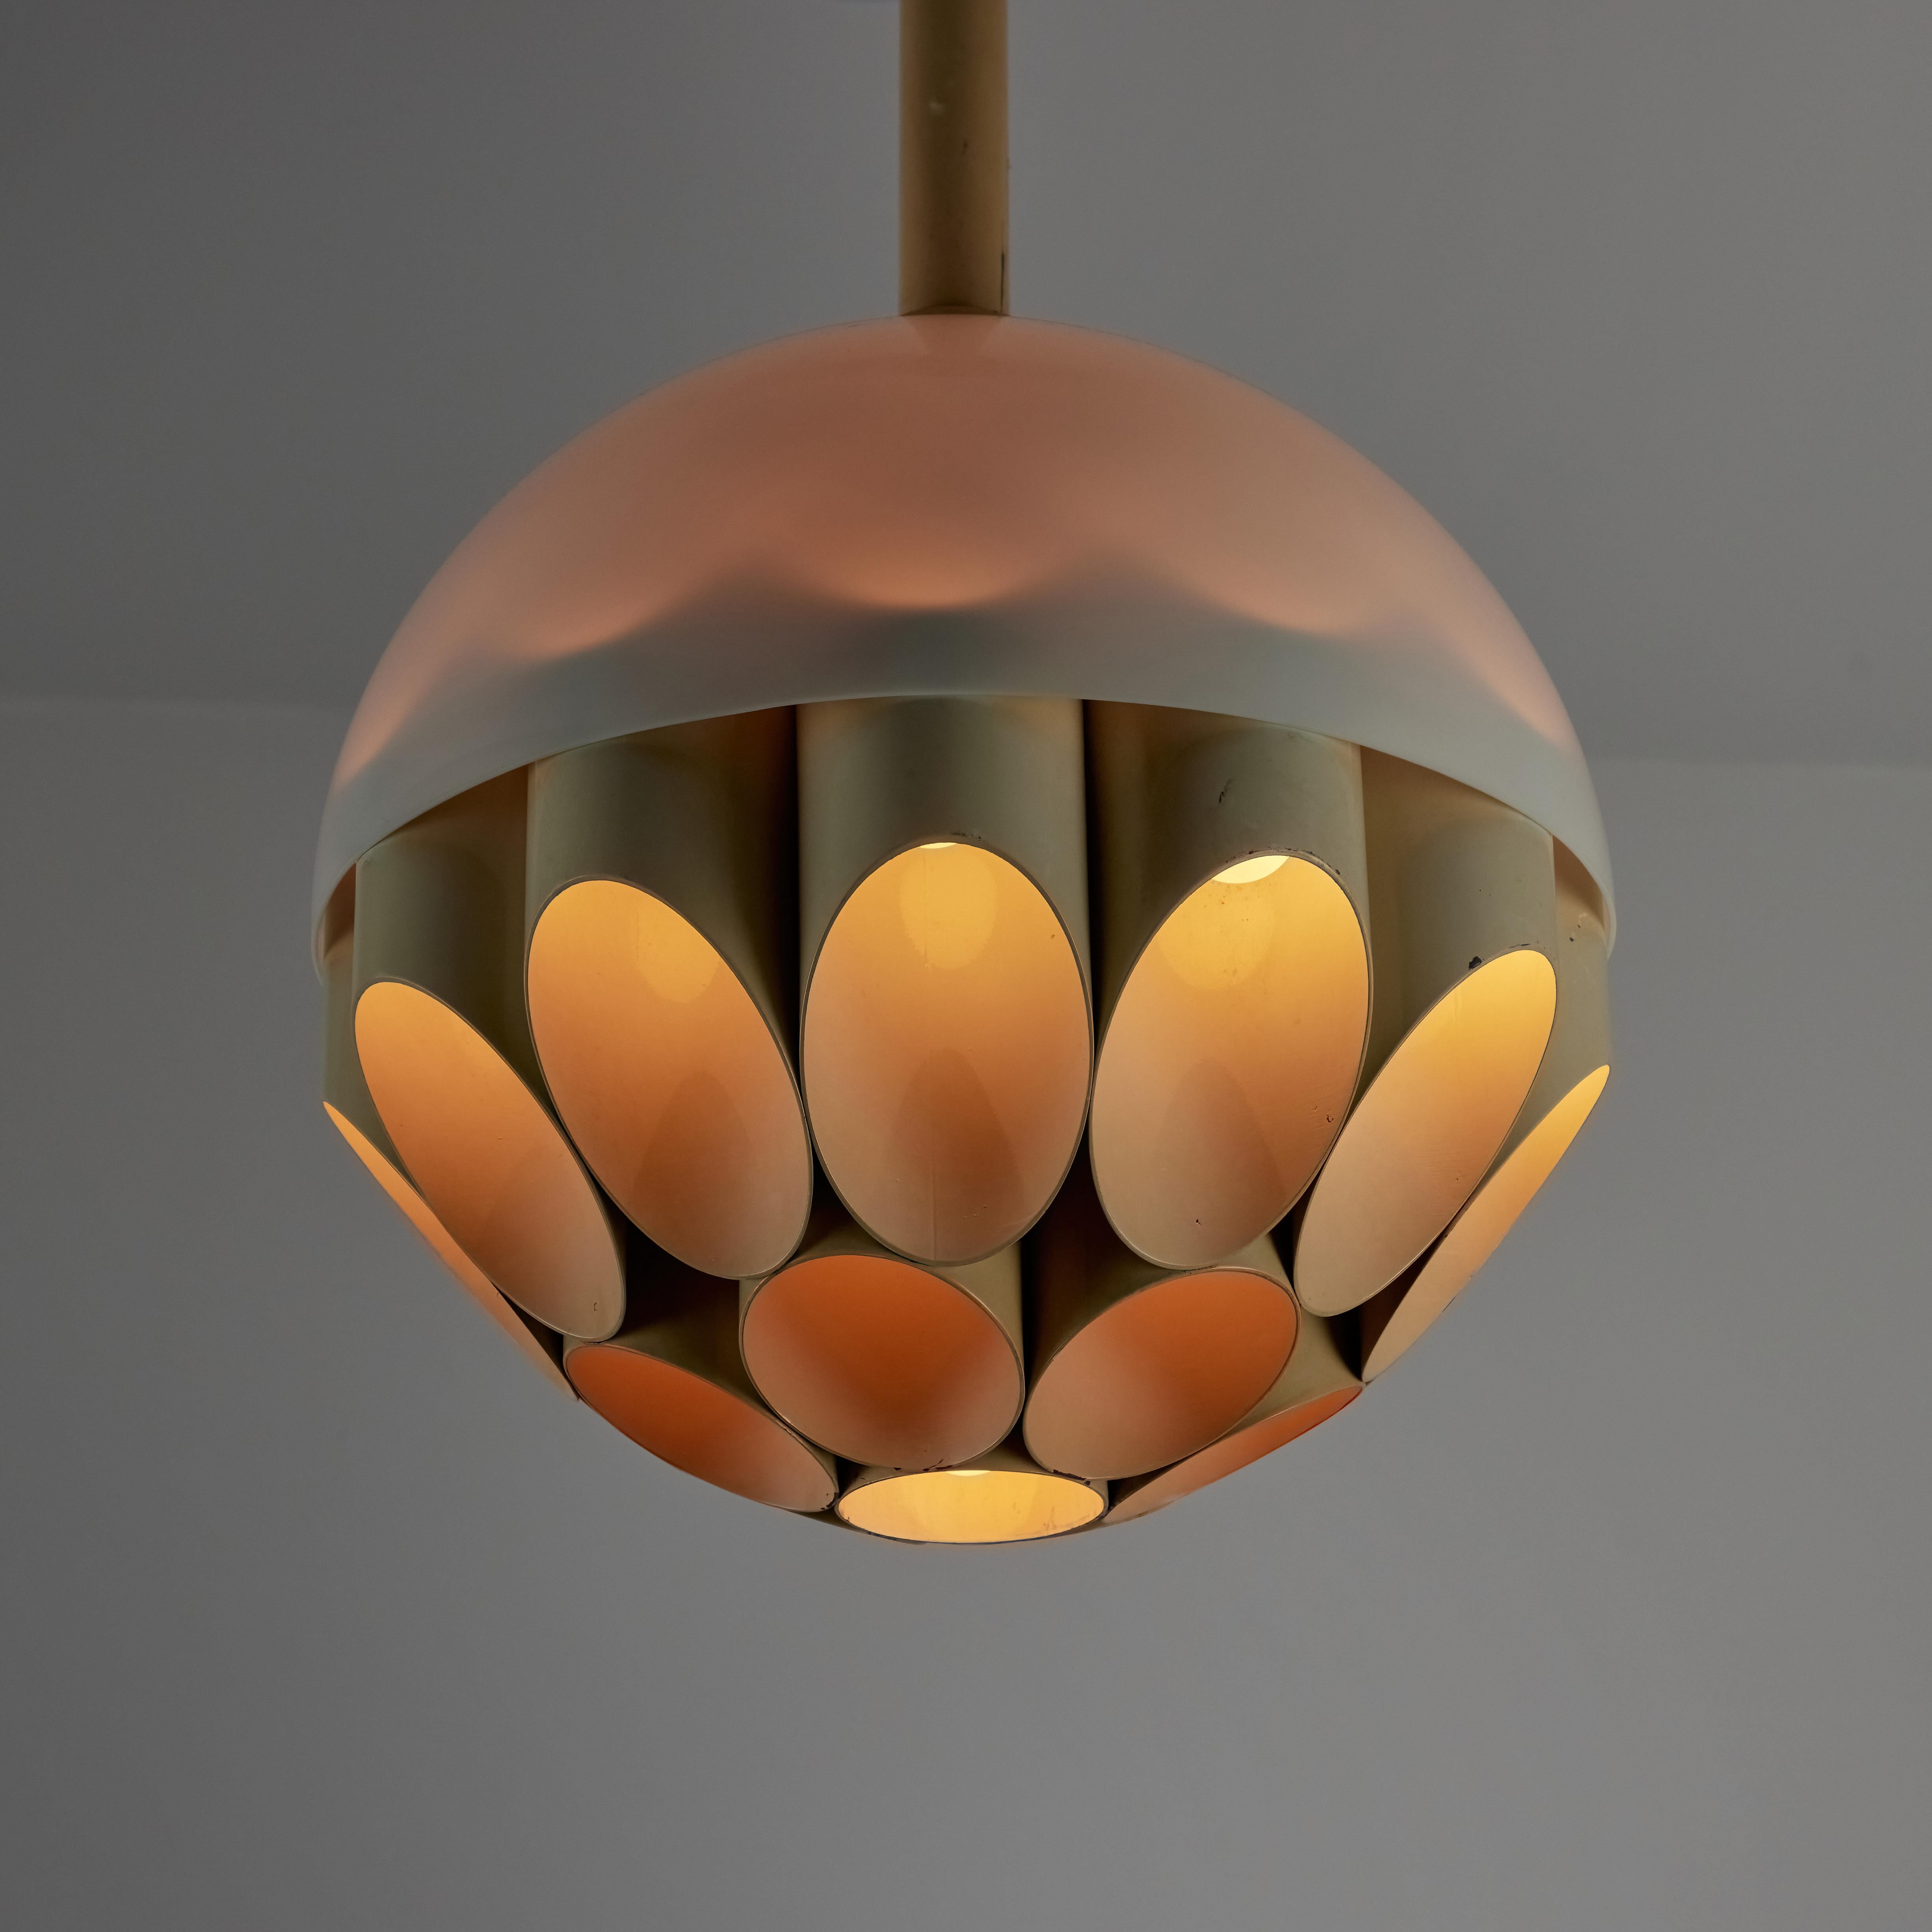 Rare 'Carciofo' ceiling light by Gianni Celada for Fontana Arte. Designed and manufactured in Italy, circa the 1960s. Reminiscent of the more iconic Carciofo models from Fontana Arte, this rare take uses an acrylic top have, allowing for a very nice